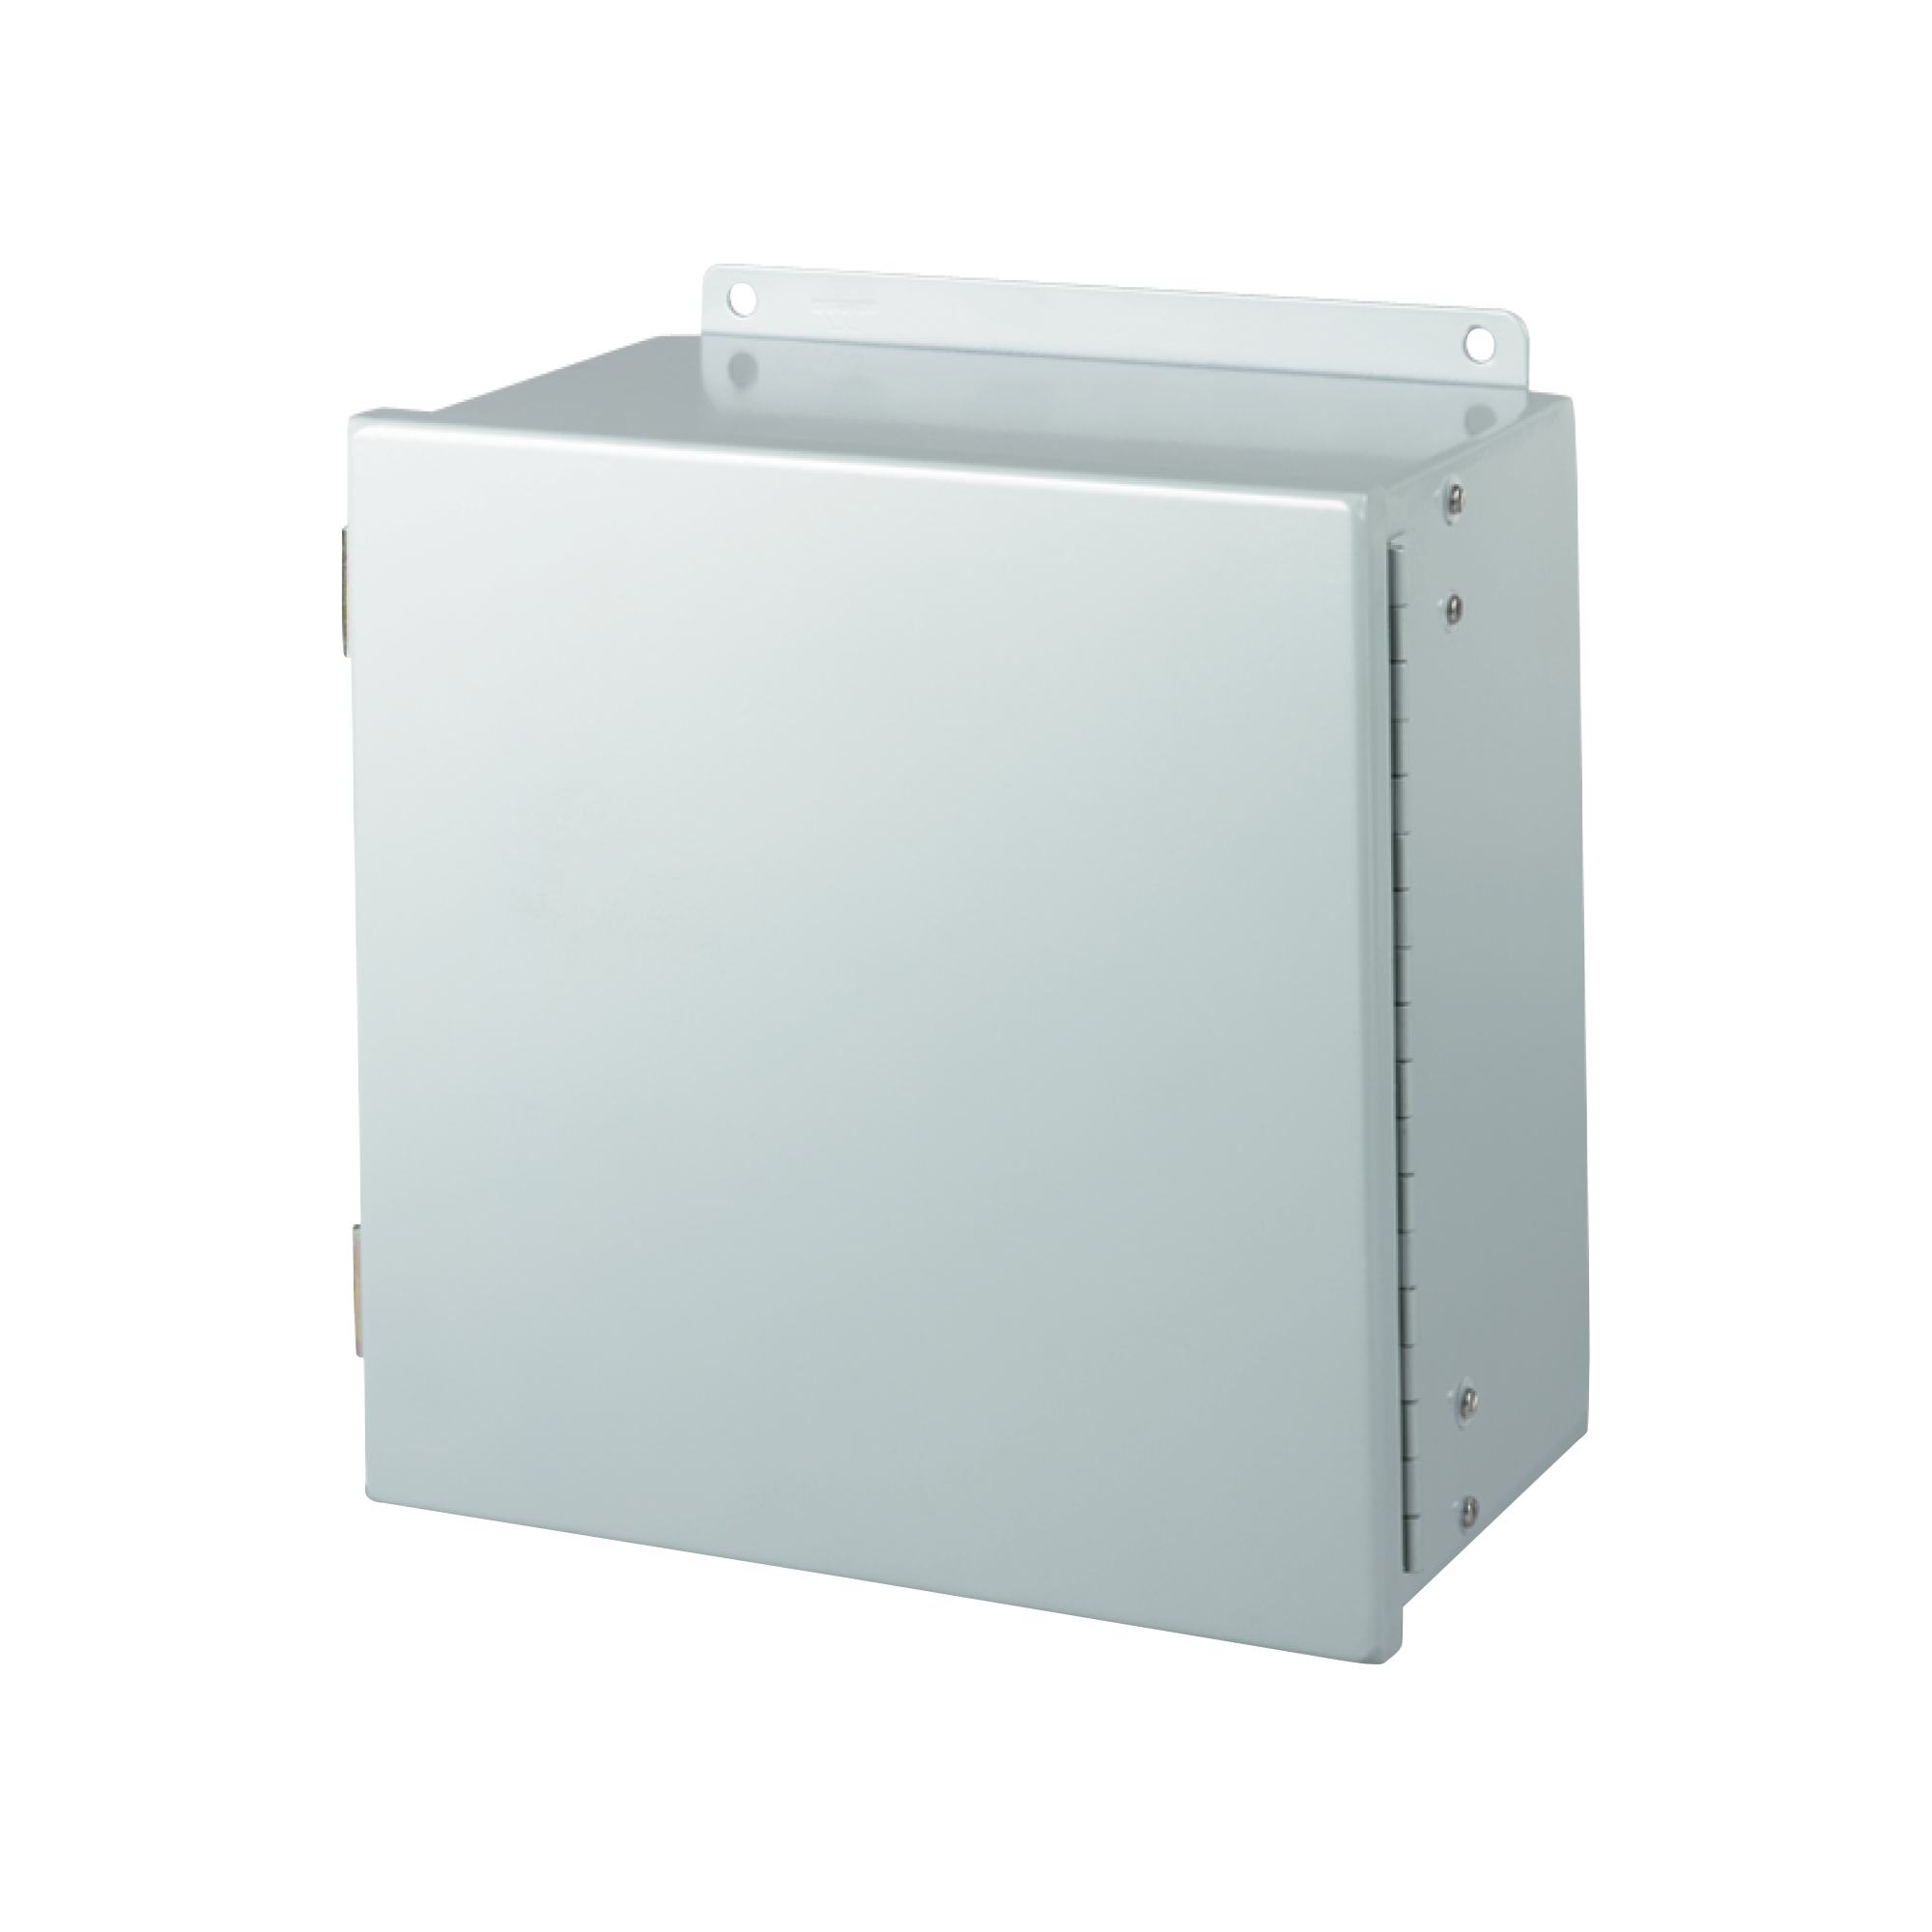 The MicroDuct Distribution Box or MDB is a convenient indoor junction box where multiple MicroDucts can be joined together. The box is used in conjunction with FuturePath Enclosure Connectors.